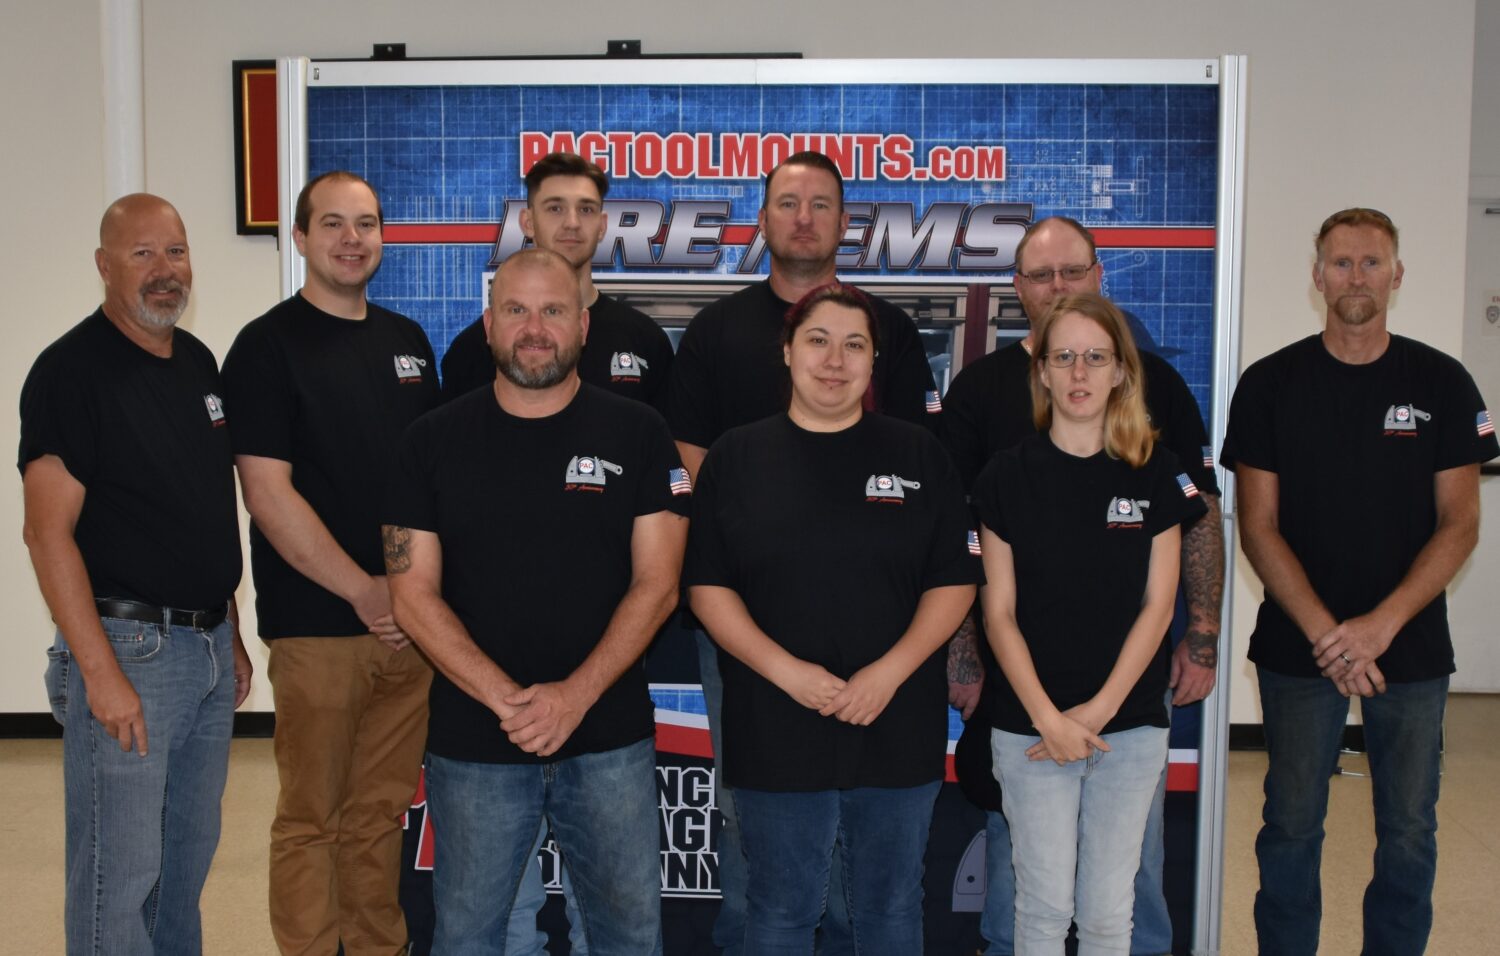 Shop staff at PAC Tool Mounts in Lancaster, NY.